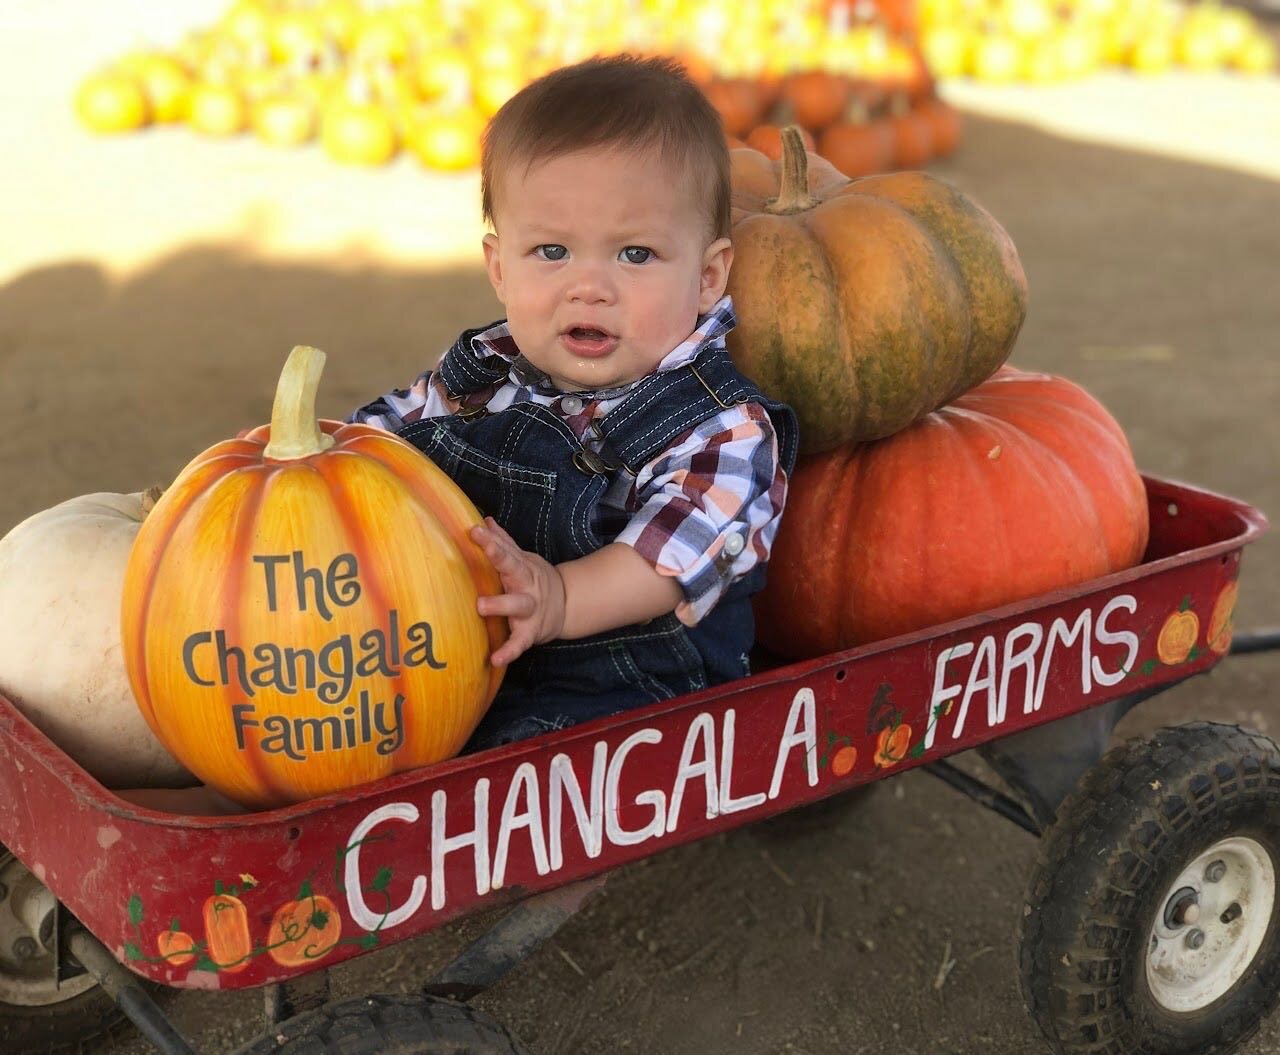 📌: Changala&rsquo;s Pumpkin Patch 🧡🎃🕷

Today is the last day to experience a local iconic annual event, the Changala Pumpkin Patch. It&rsquo;s their last year after 32 years of opening our farm to the public. 

Did you know&hellip;. Alan Changala